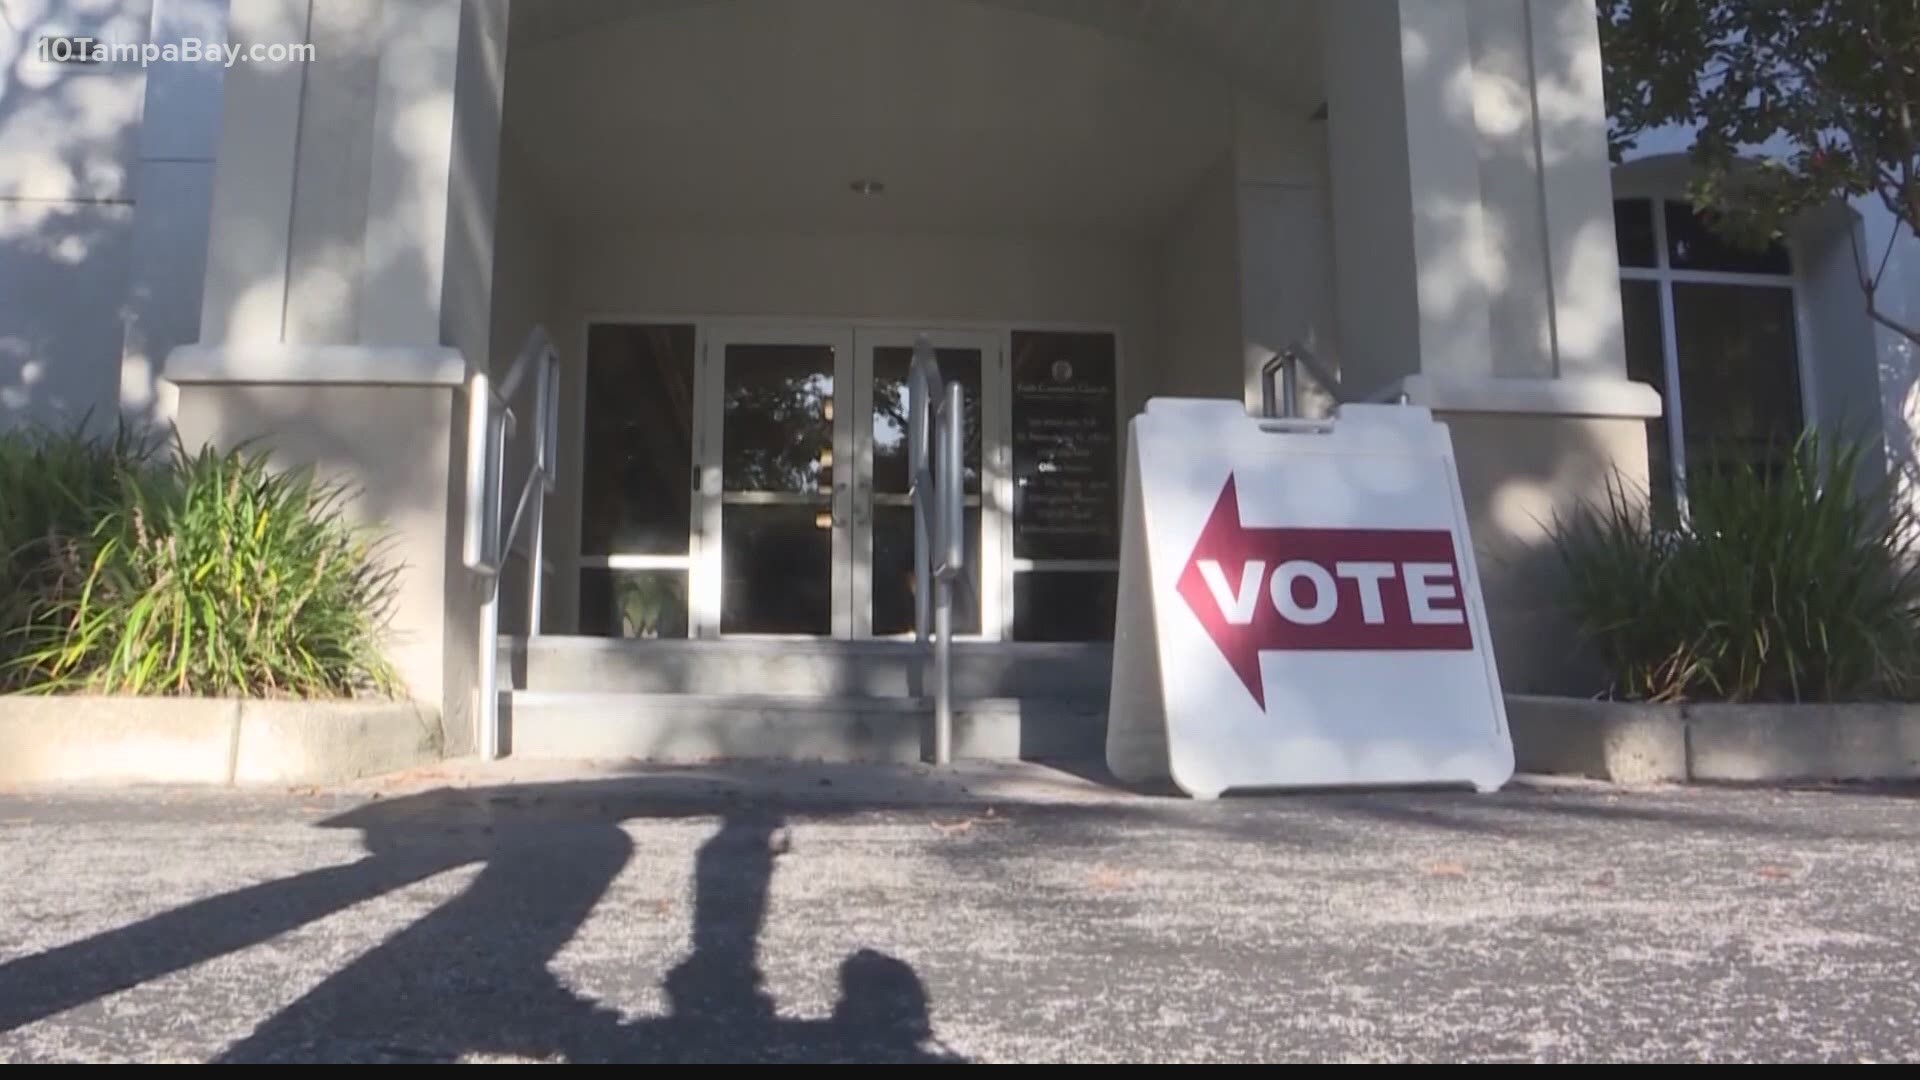 Some states allow voters to change their votes once cast, but Florida does not.